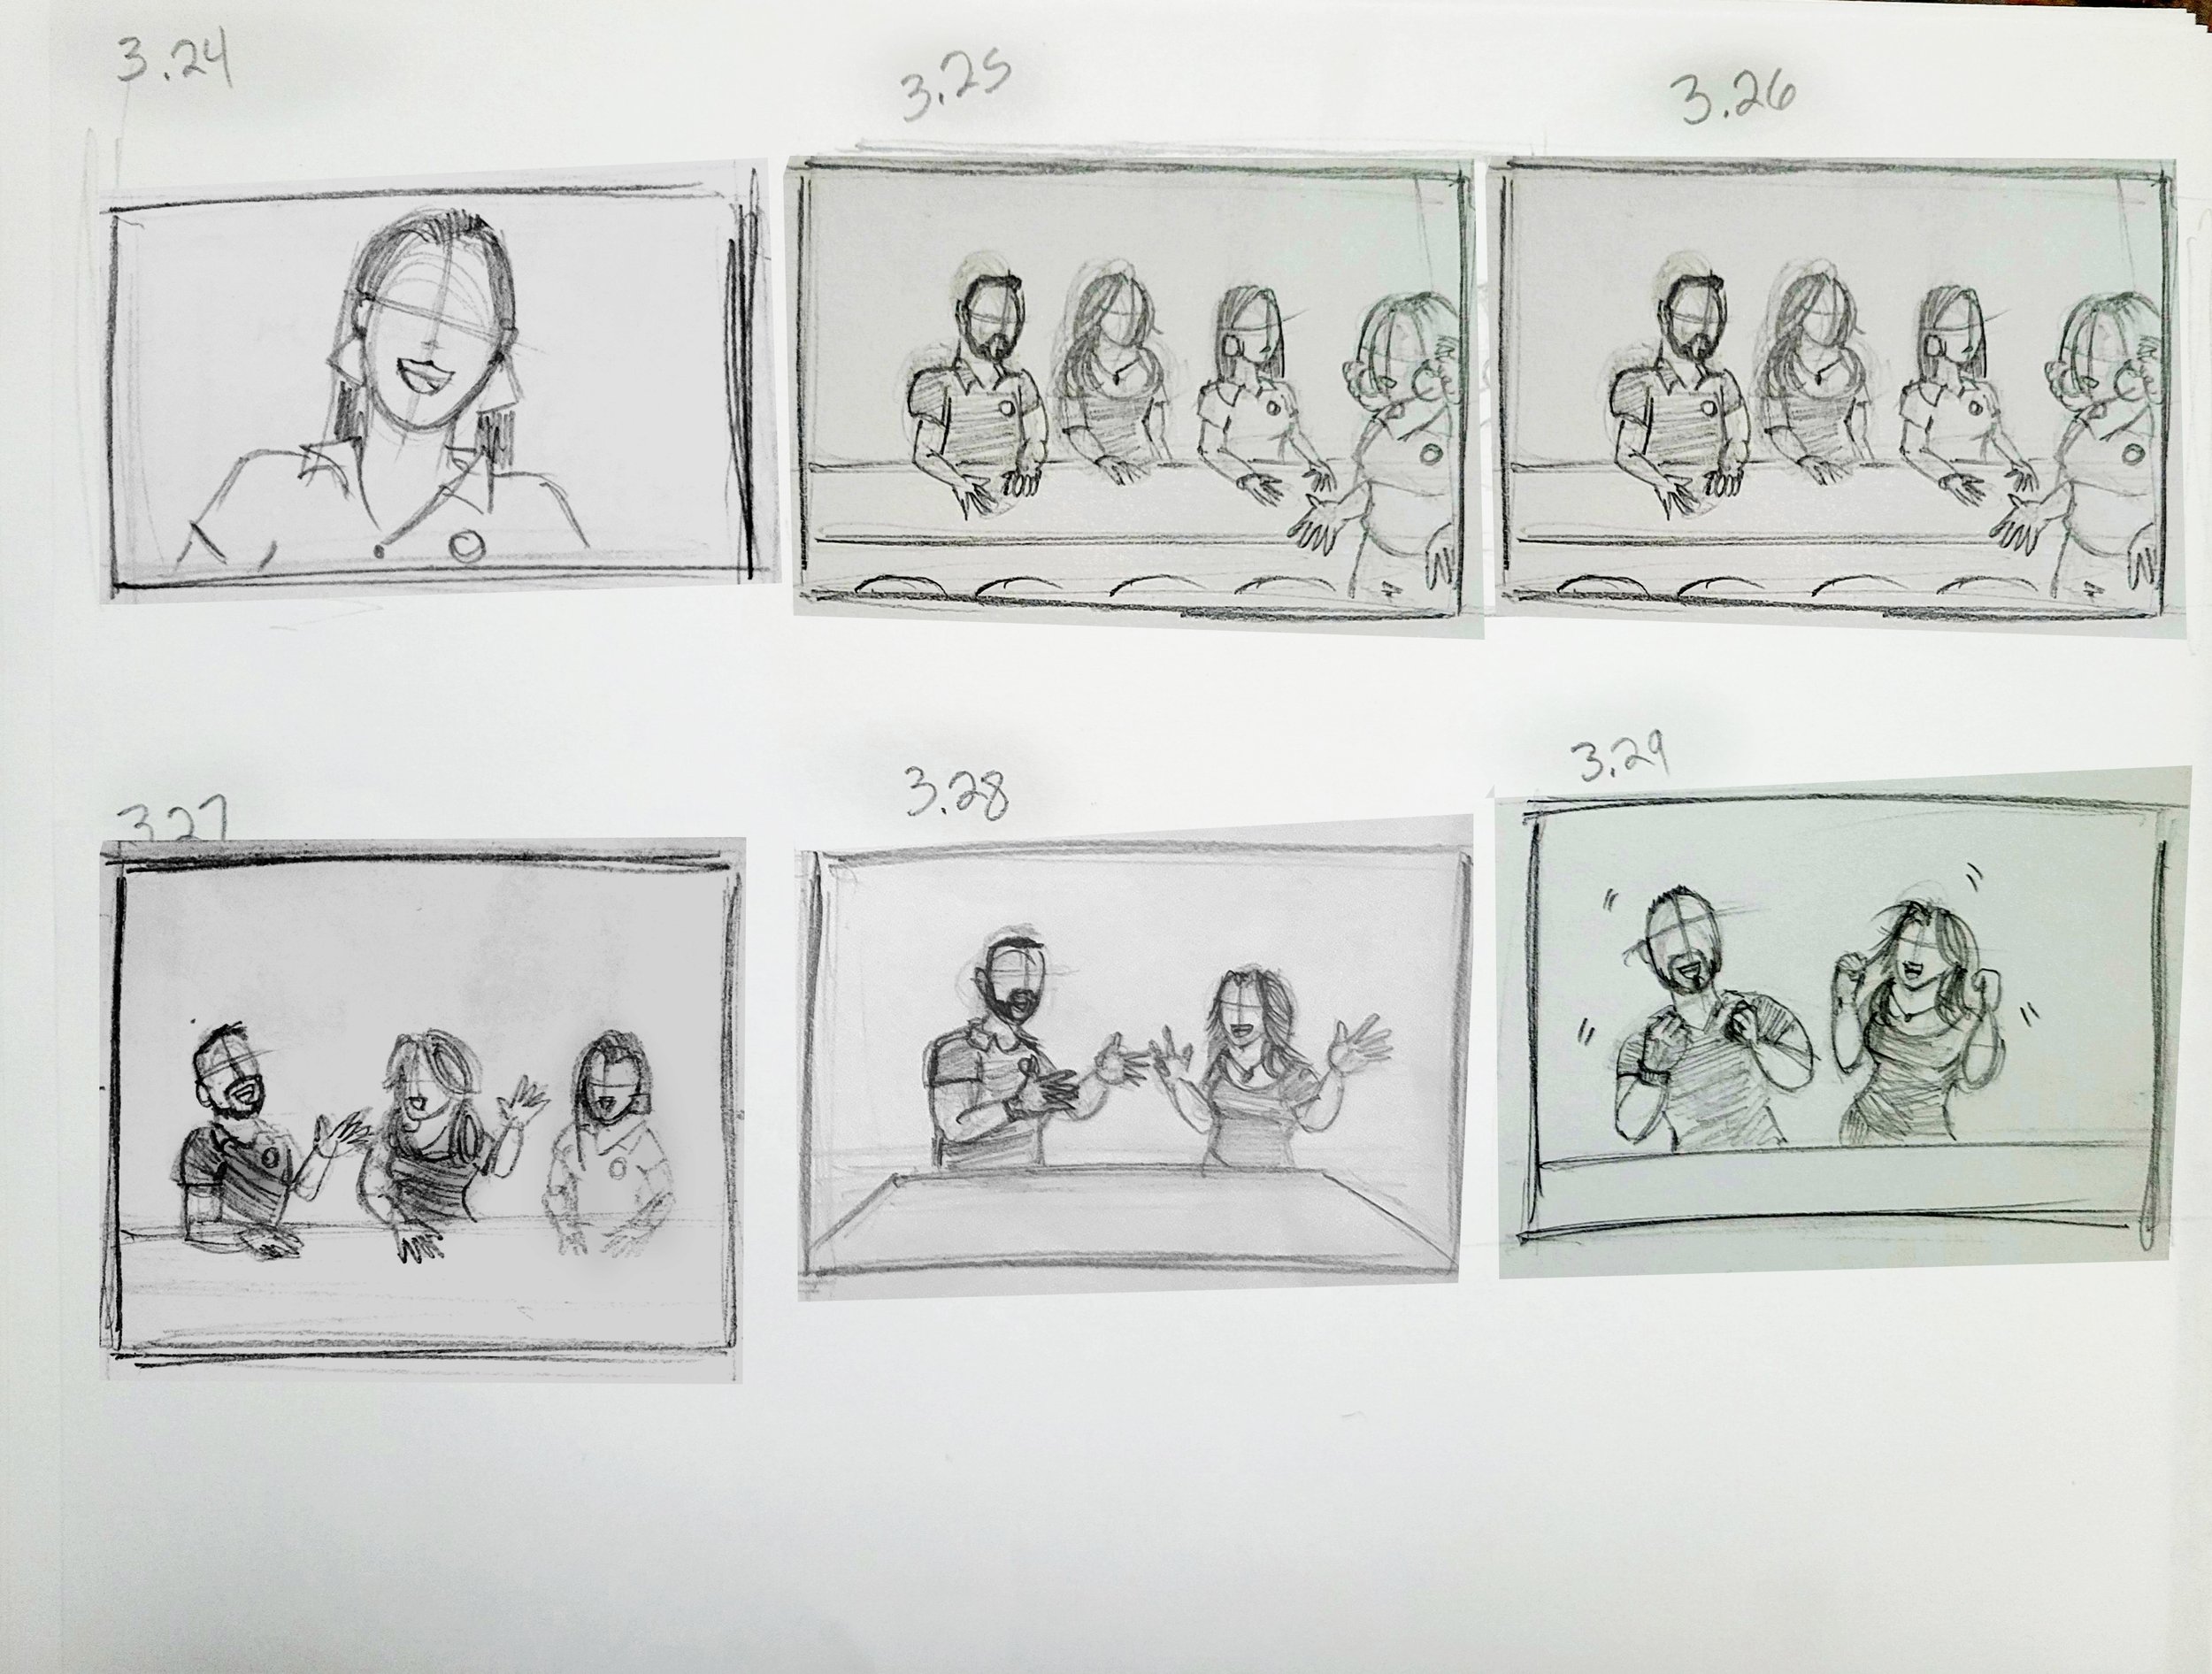 WR_Real_Suite_Eats_S1_E2_StoryBoard_Frames_3_24_to_3_29.jpg